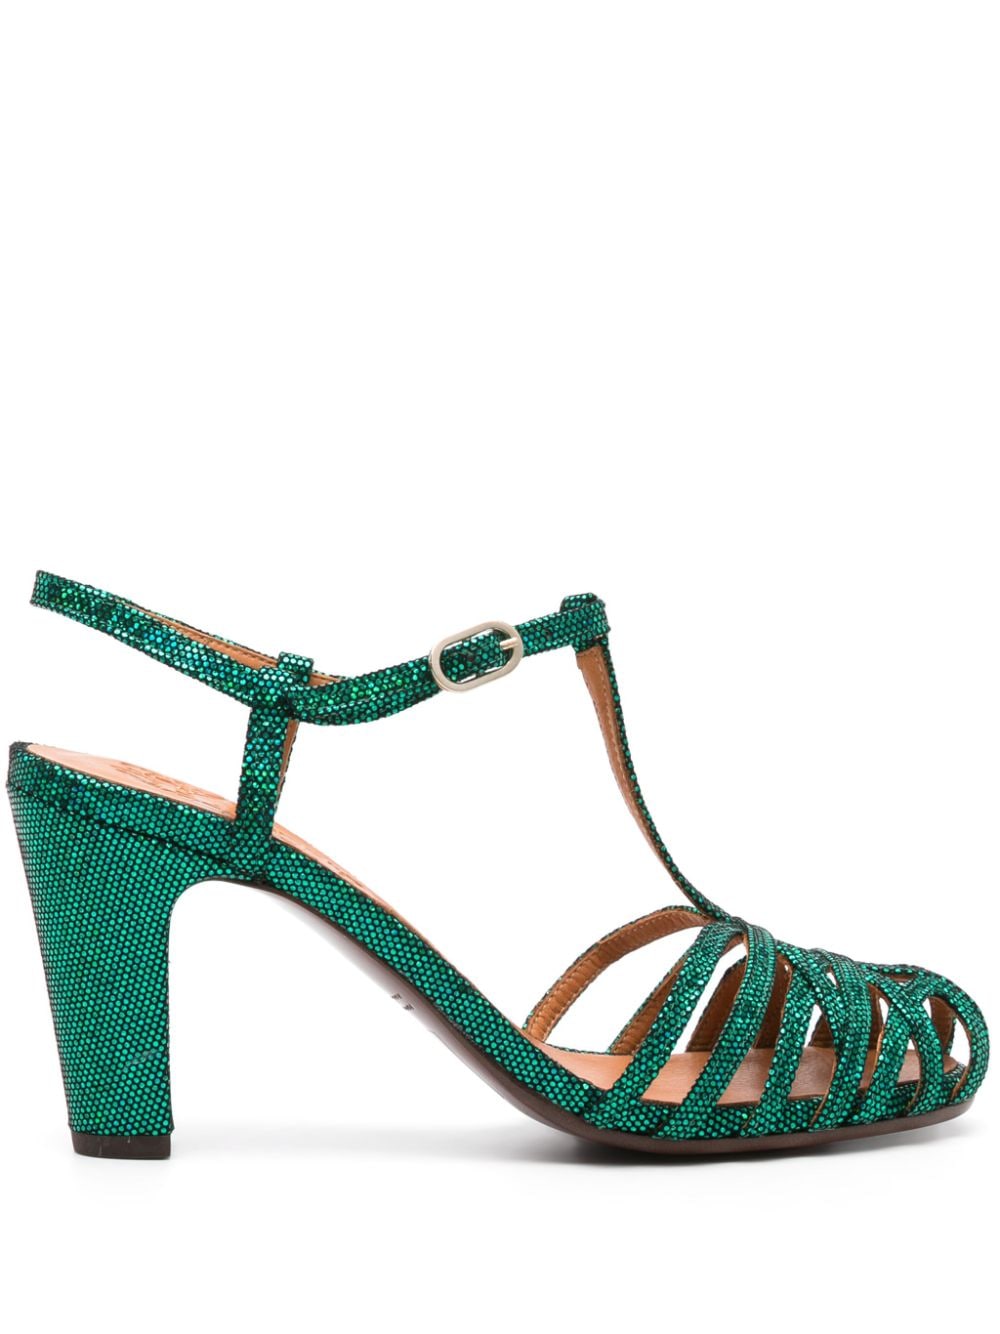 Chie Mihara Ku-quenu 90mm Caged Sandals In Green